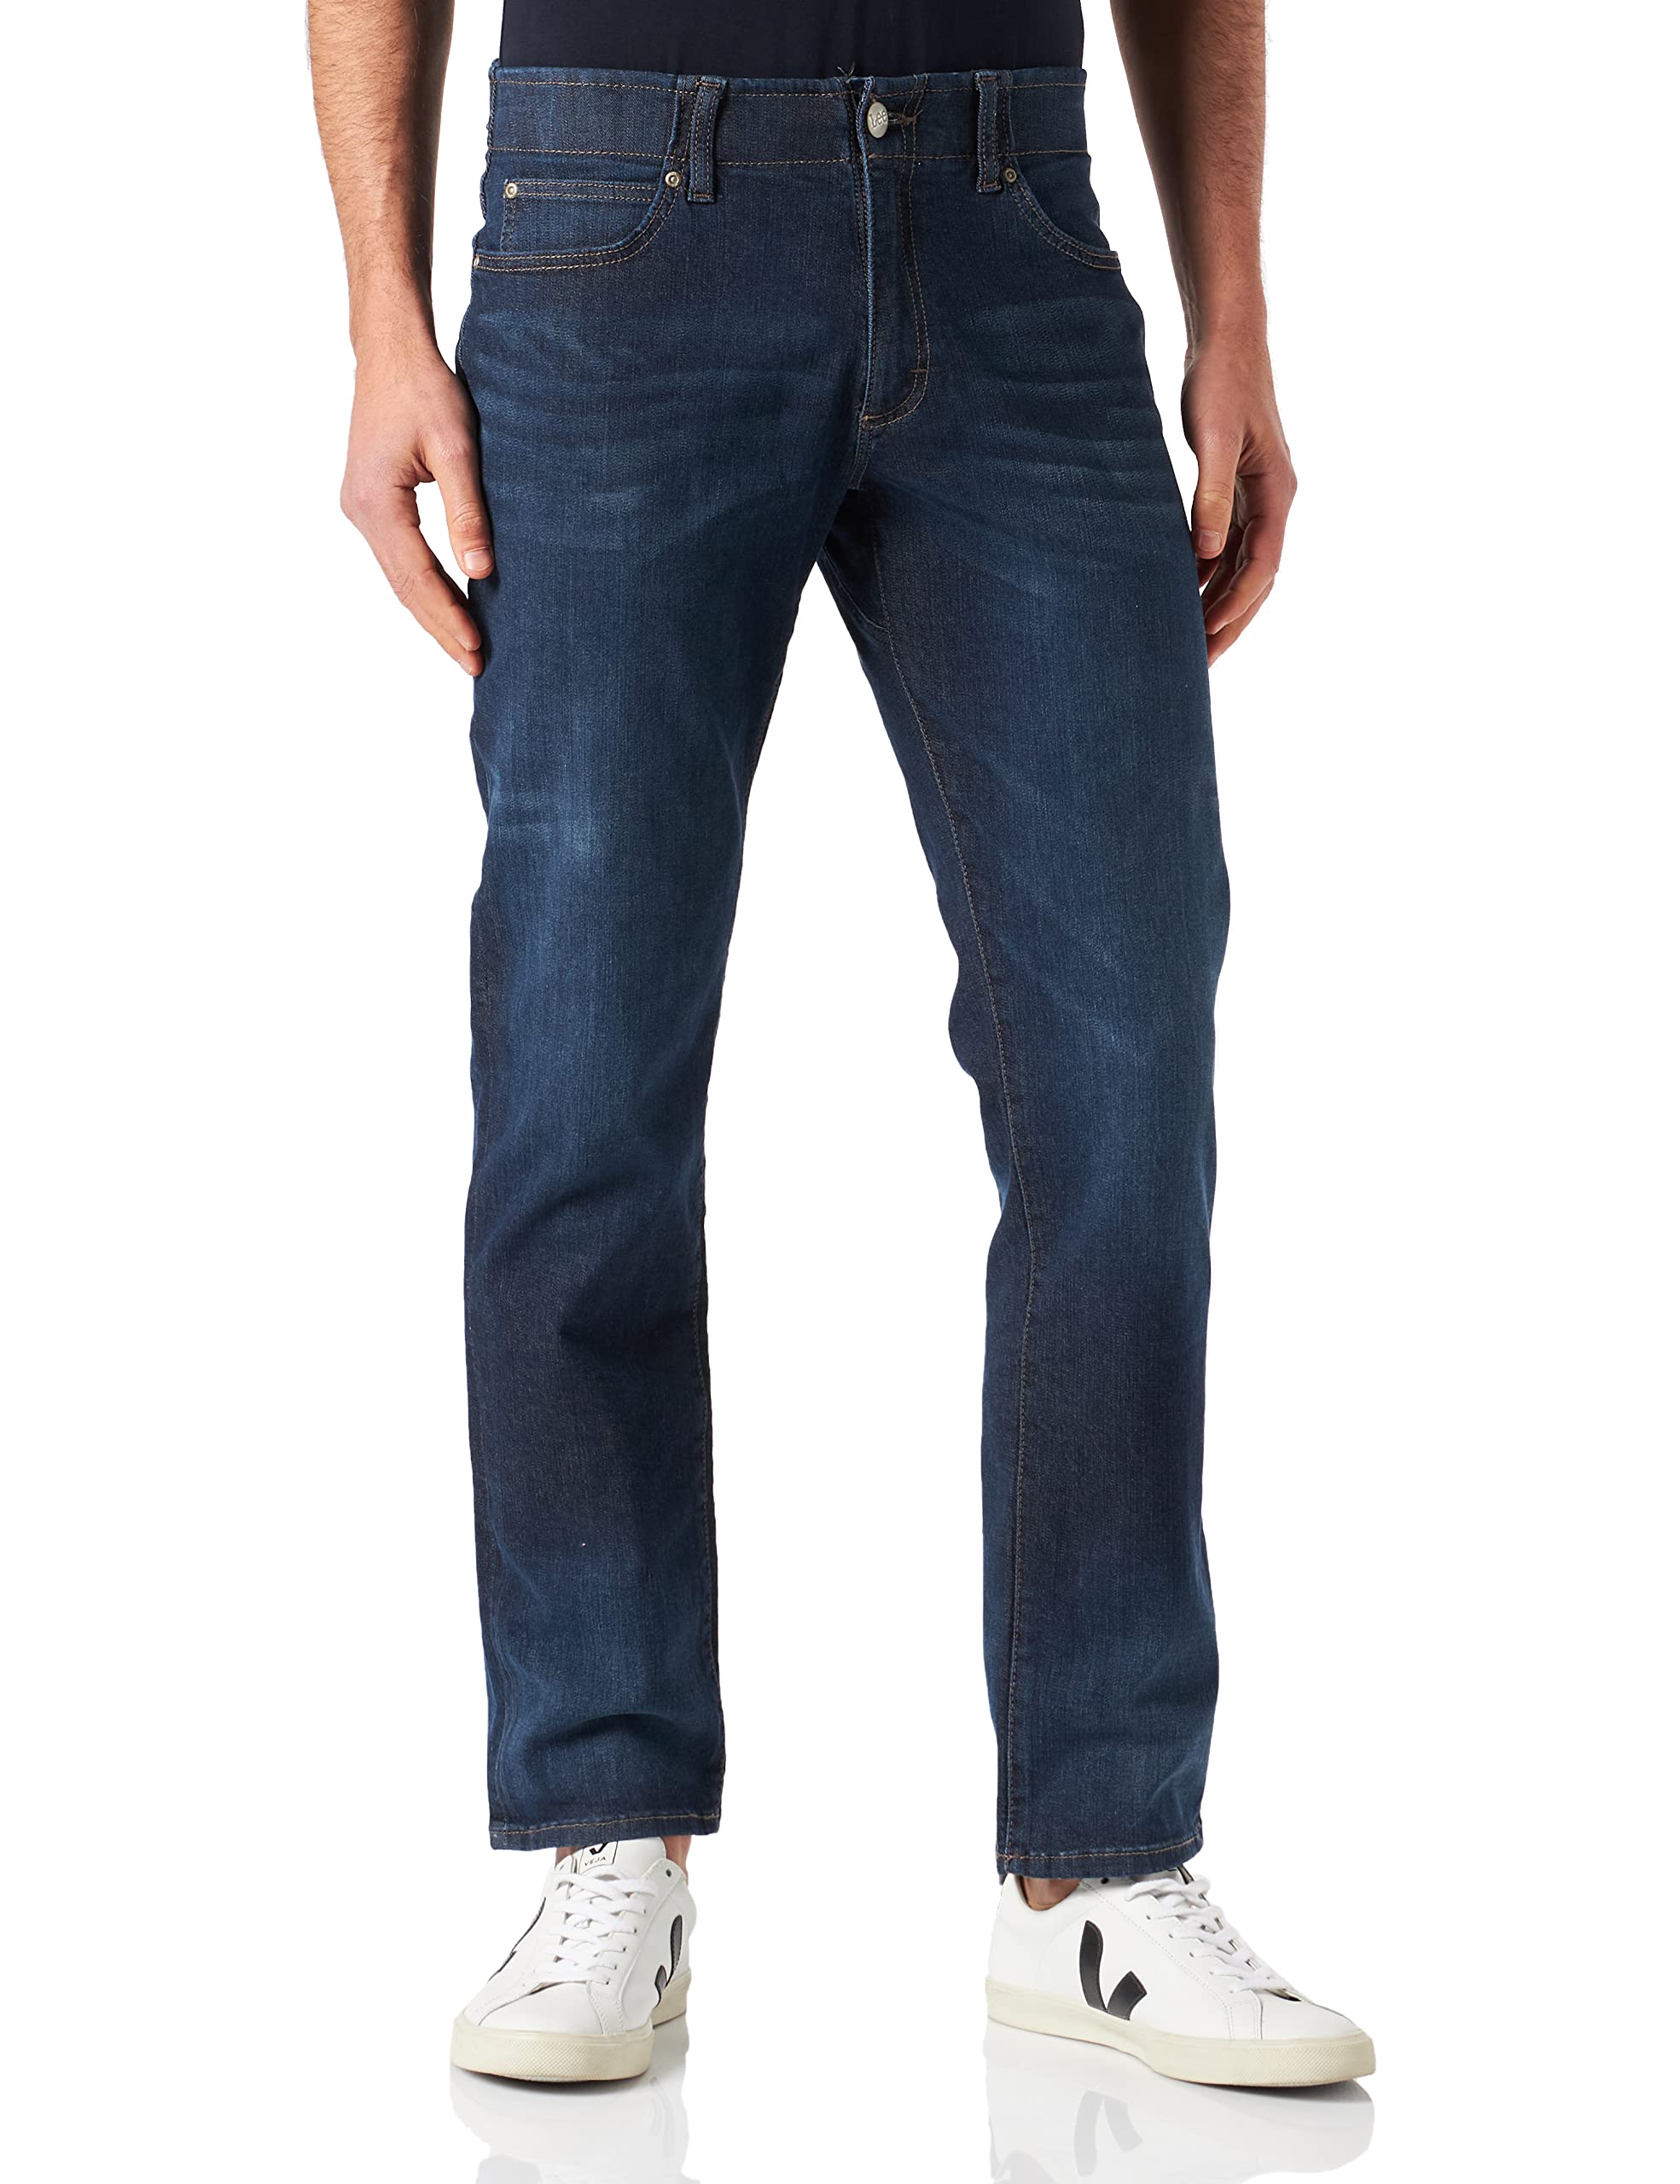 Lee Herren Straight Fit Xm Extreme Motion Jeans, Trip, 42W / 32L